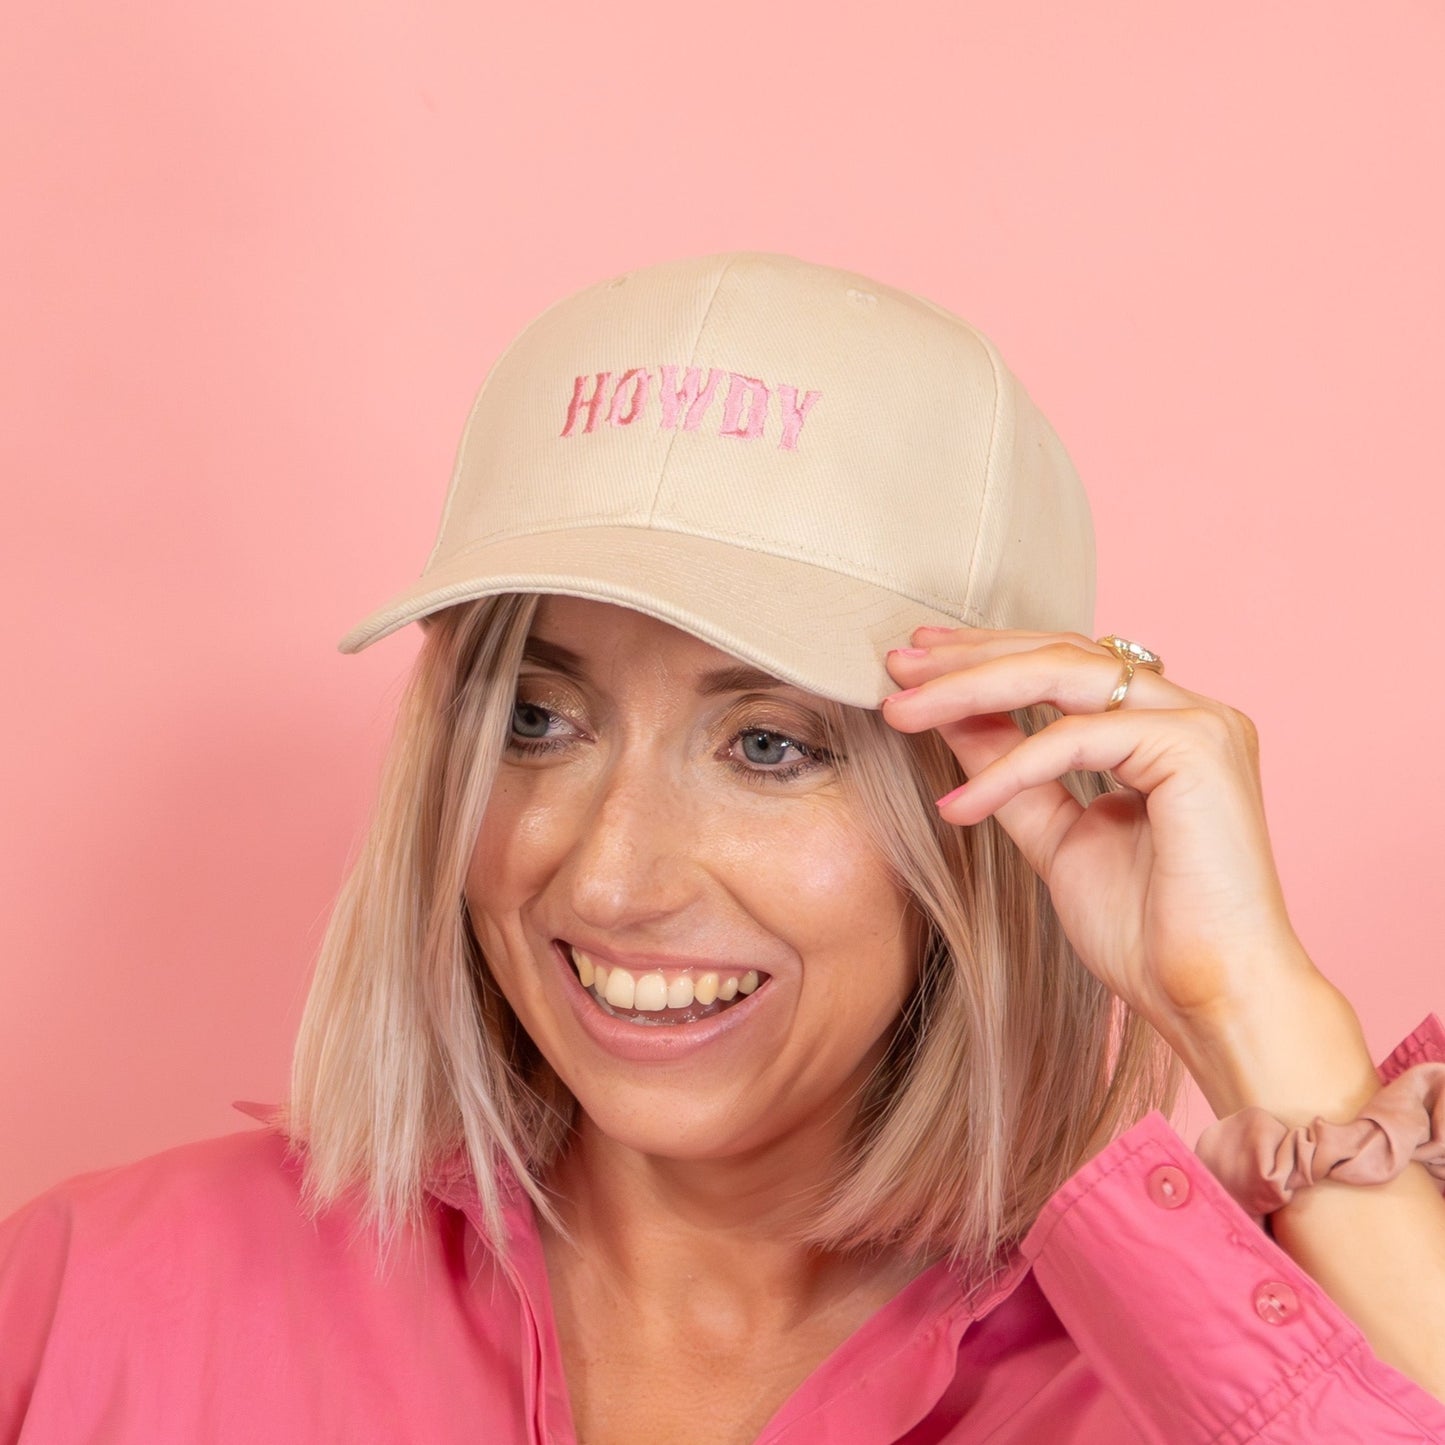 Howdy Embroidered Slogan Cap